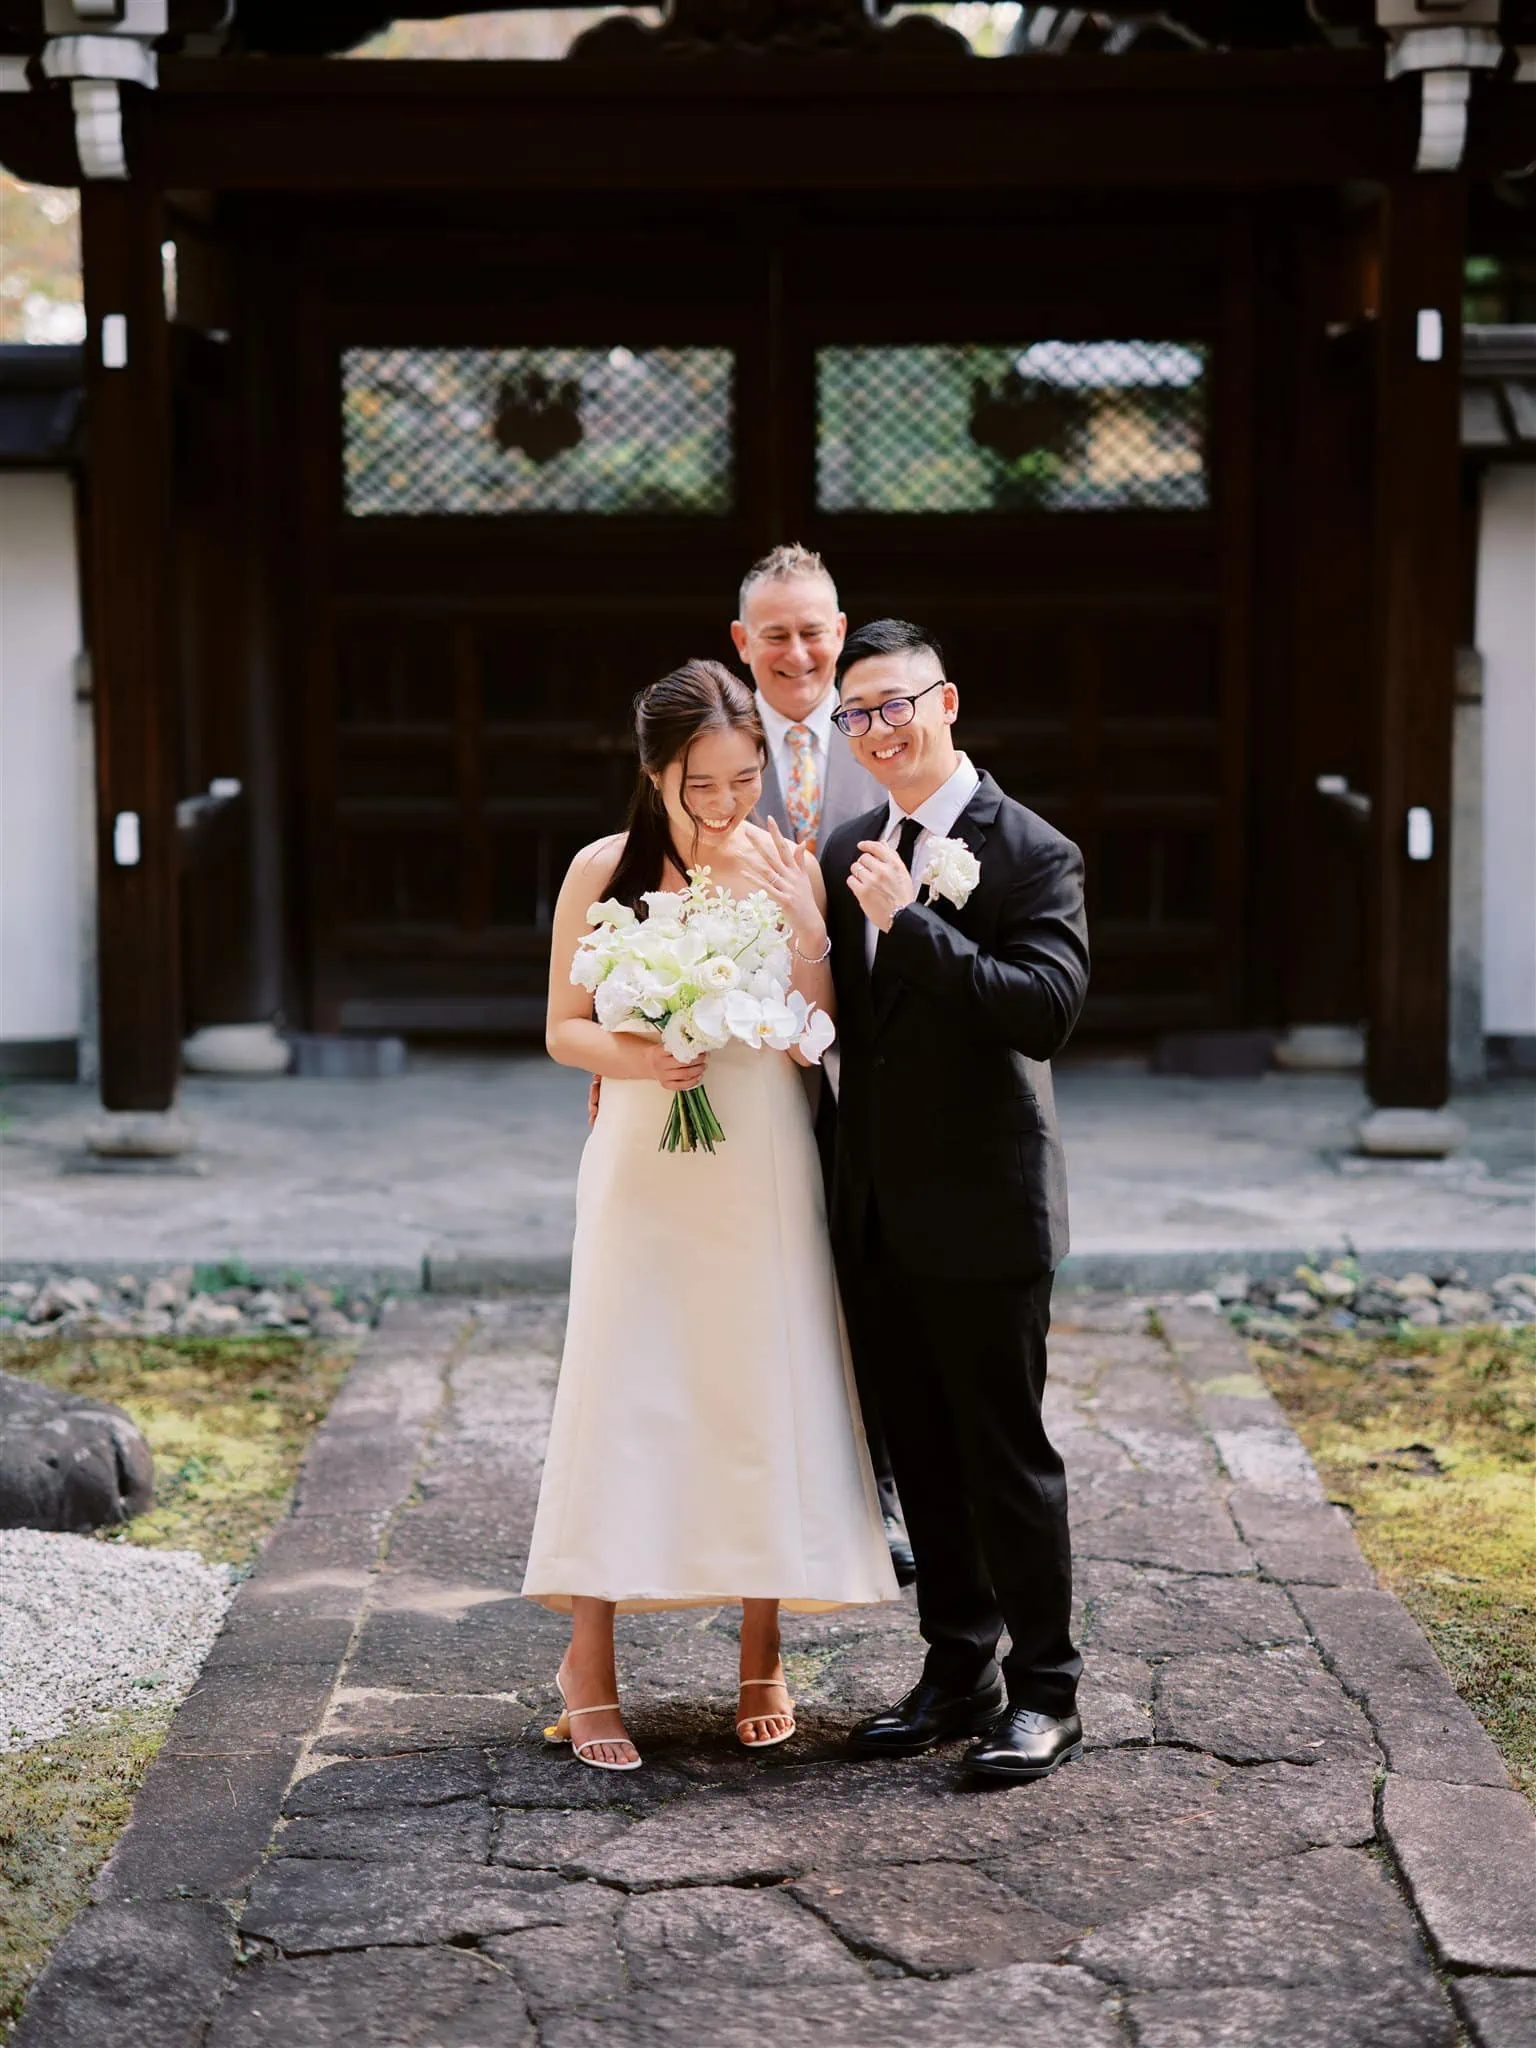 Kyoto Tokyo Japan Elopement Wedding Photographer, Planner & Videographer | A Japan elopement takes place with a bride and groom standing in front of a Japanese temple.